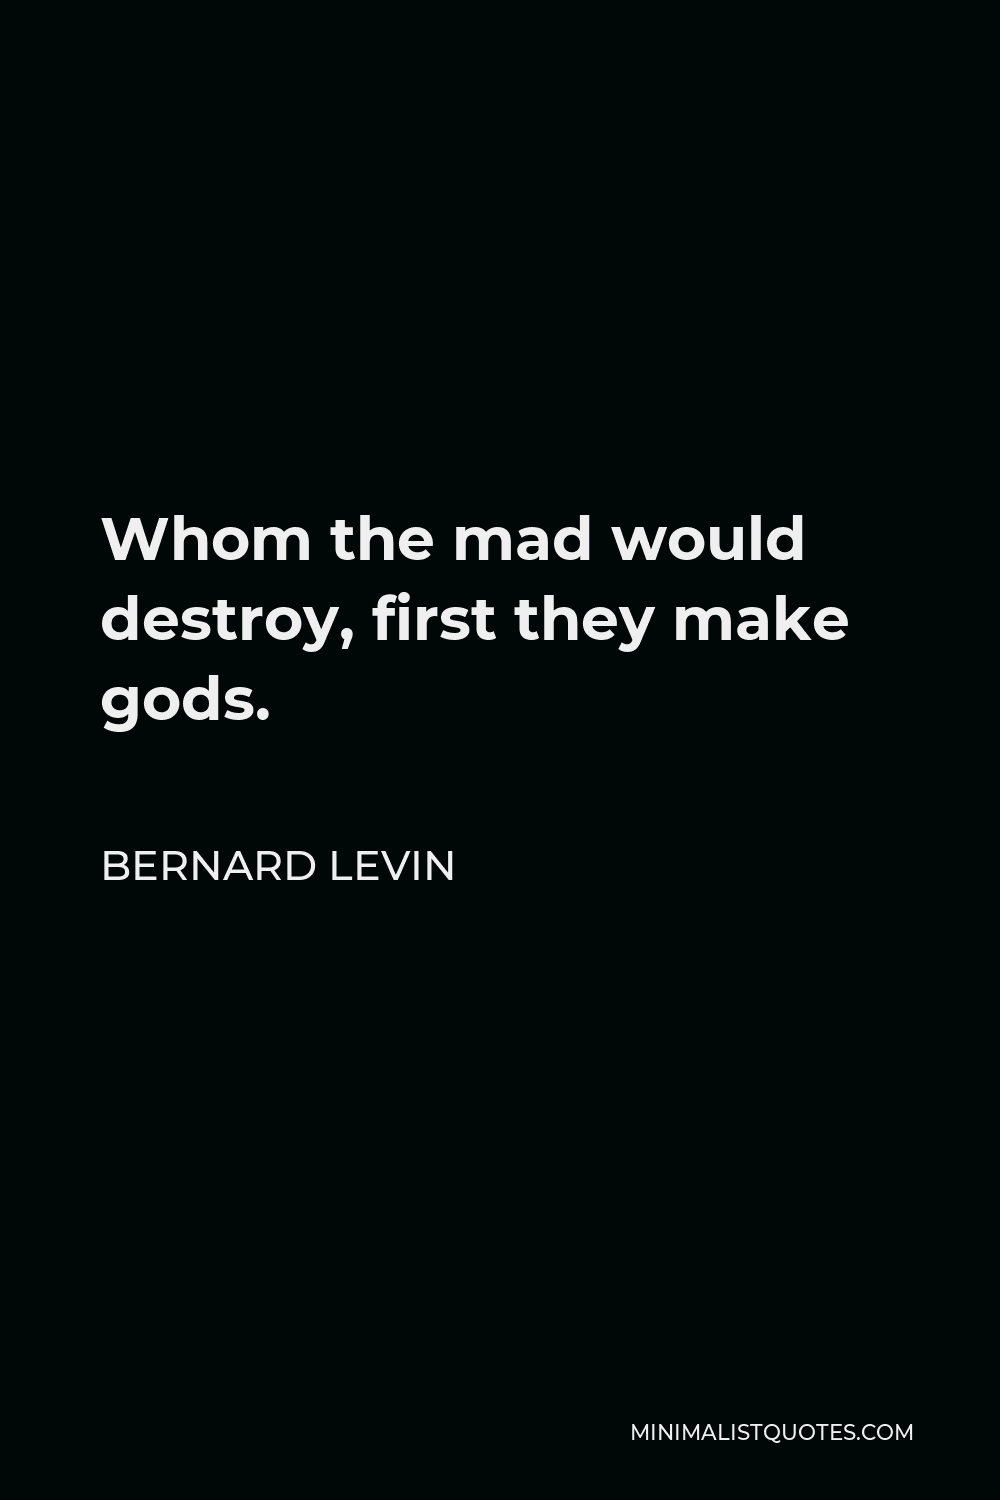 Bernard Levin Quote - Whom the mad would destroy, first they make gods.